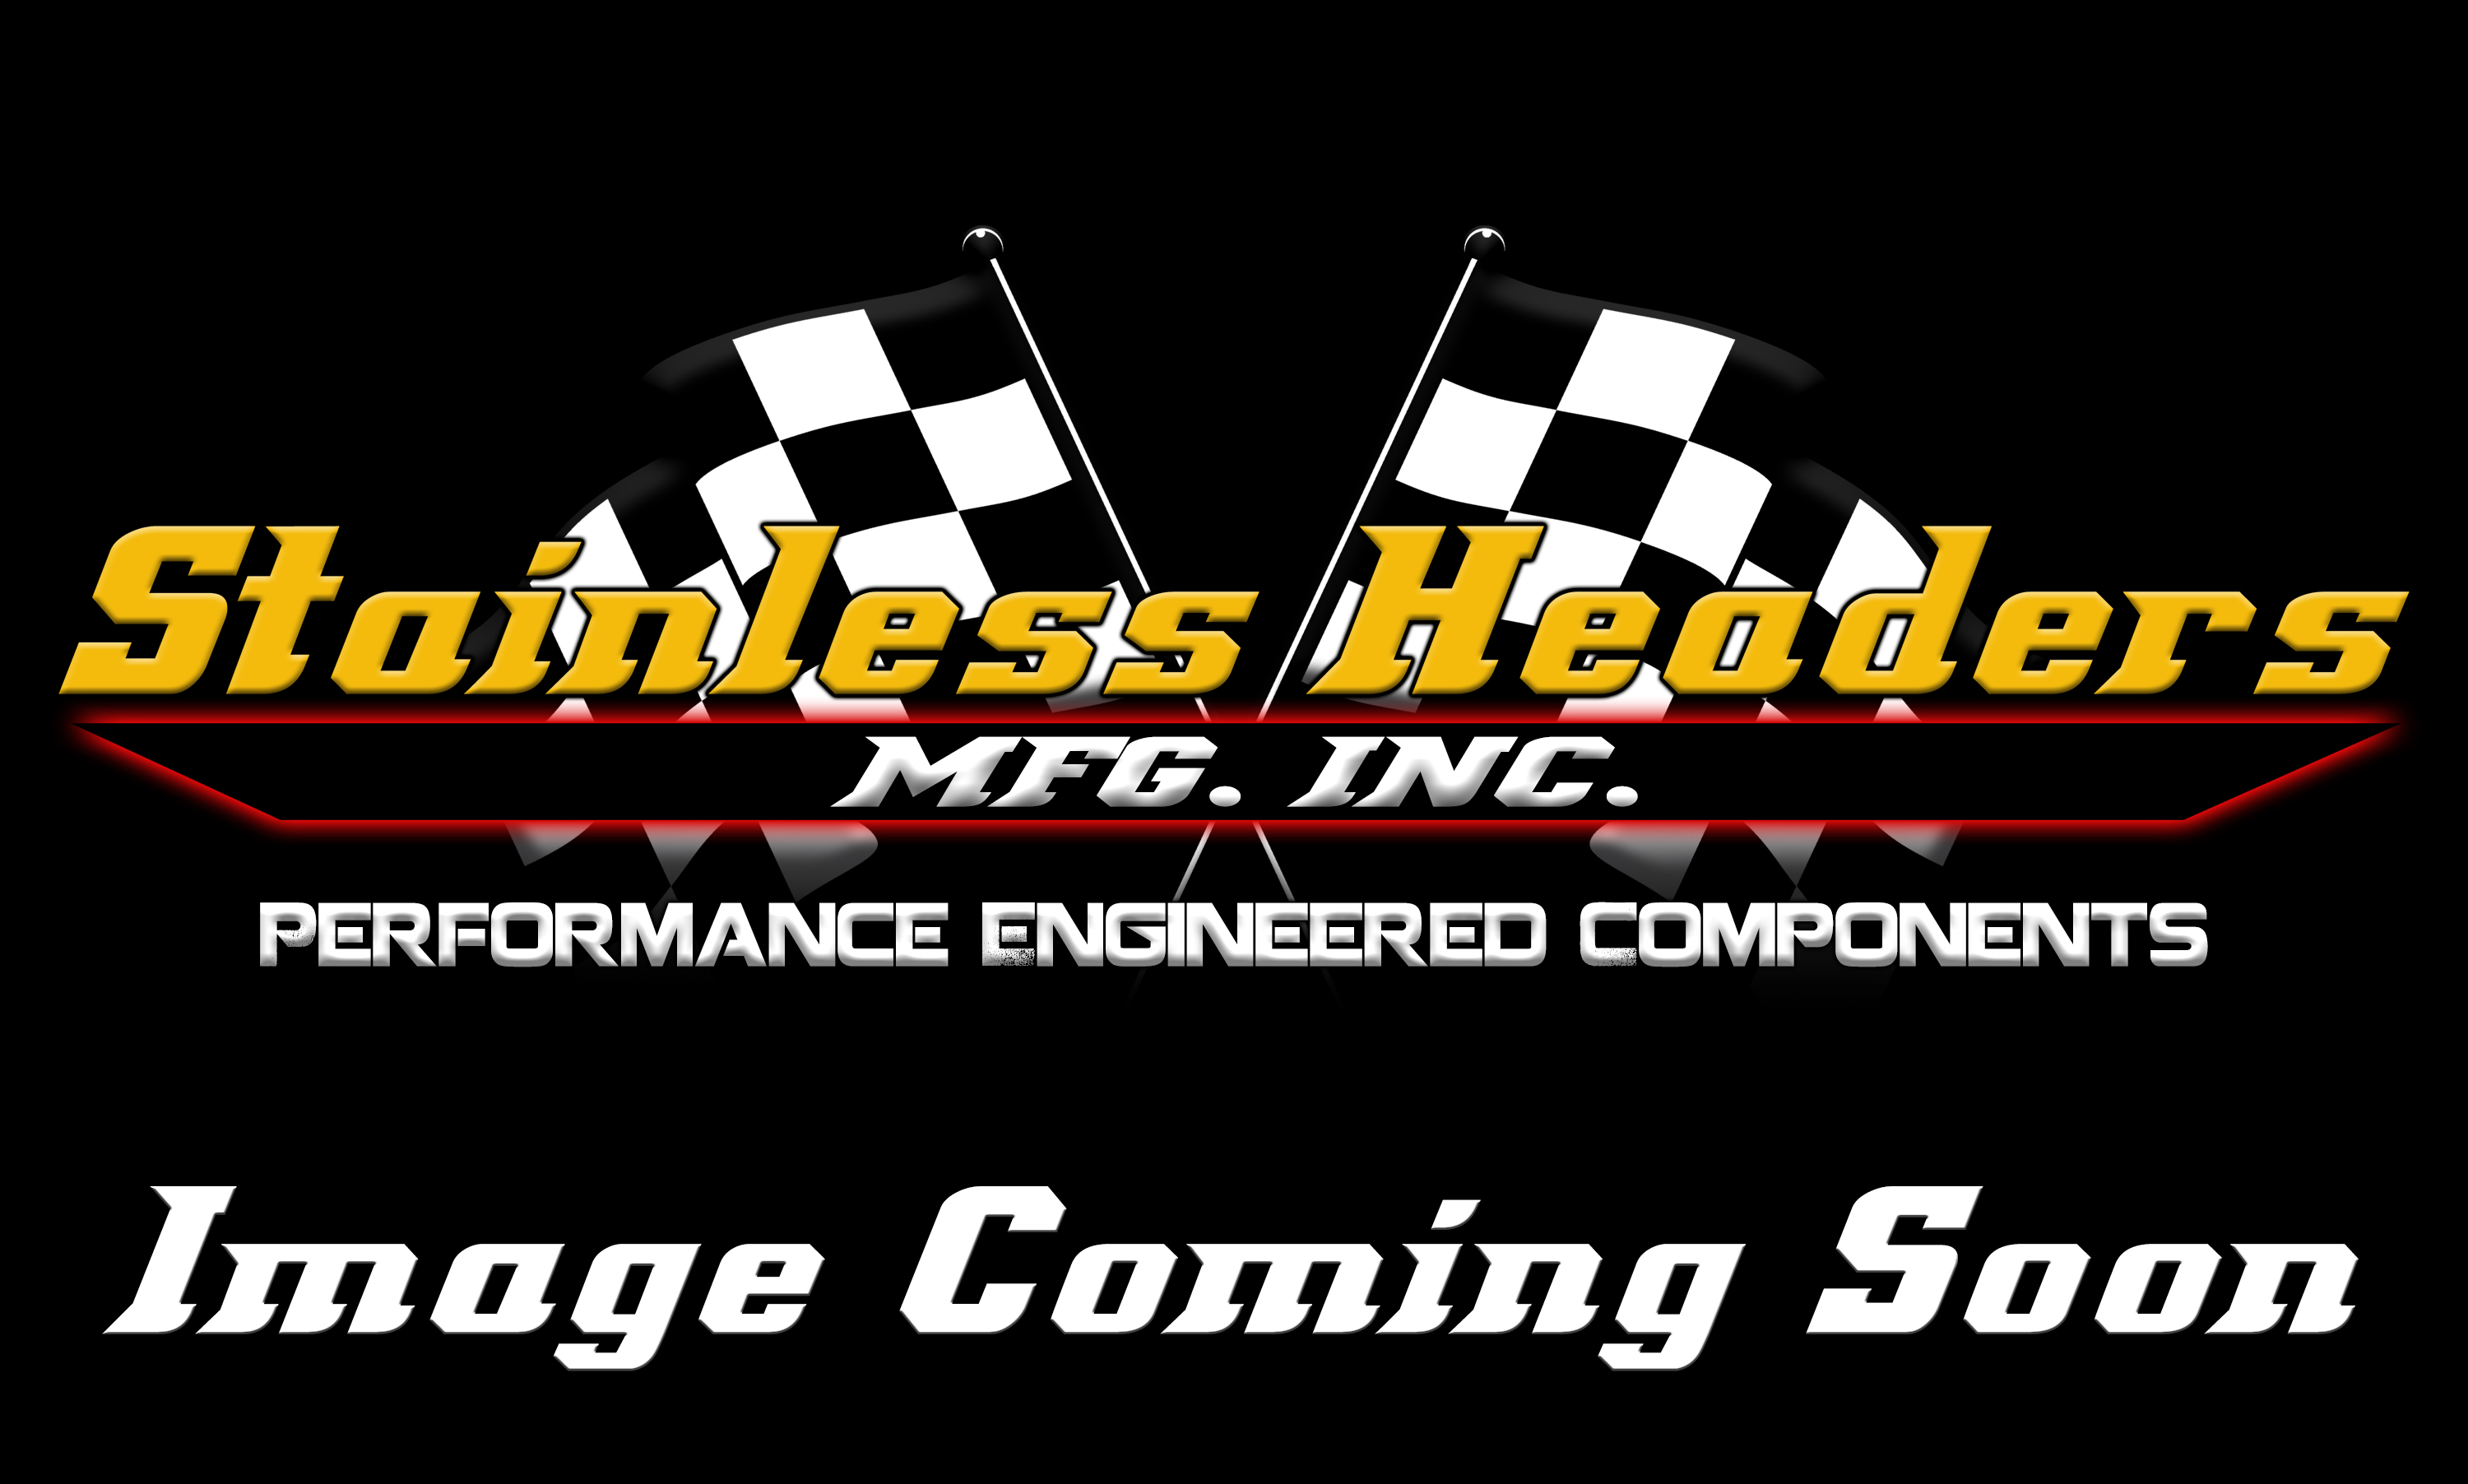 Merge Collectors - 321 Stainless Steel Merge Collectors - Stainless Headers - 2 1/2" Primary 3 into 1 Performance Merge Collector-16ga 321ss